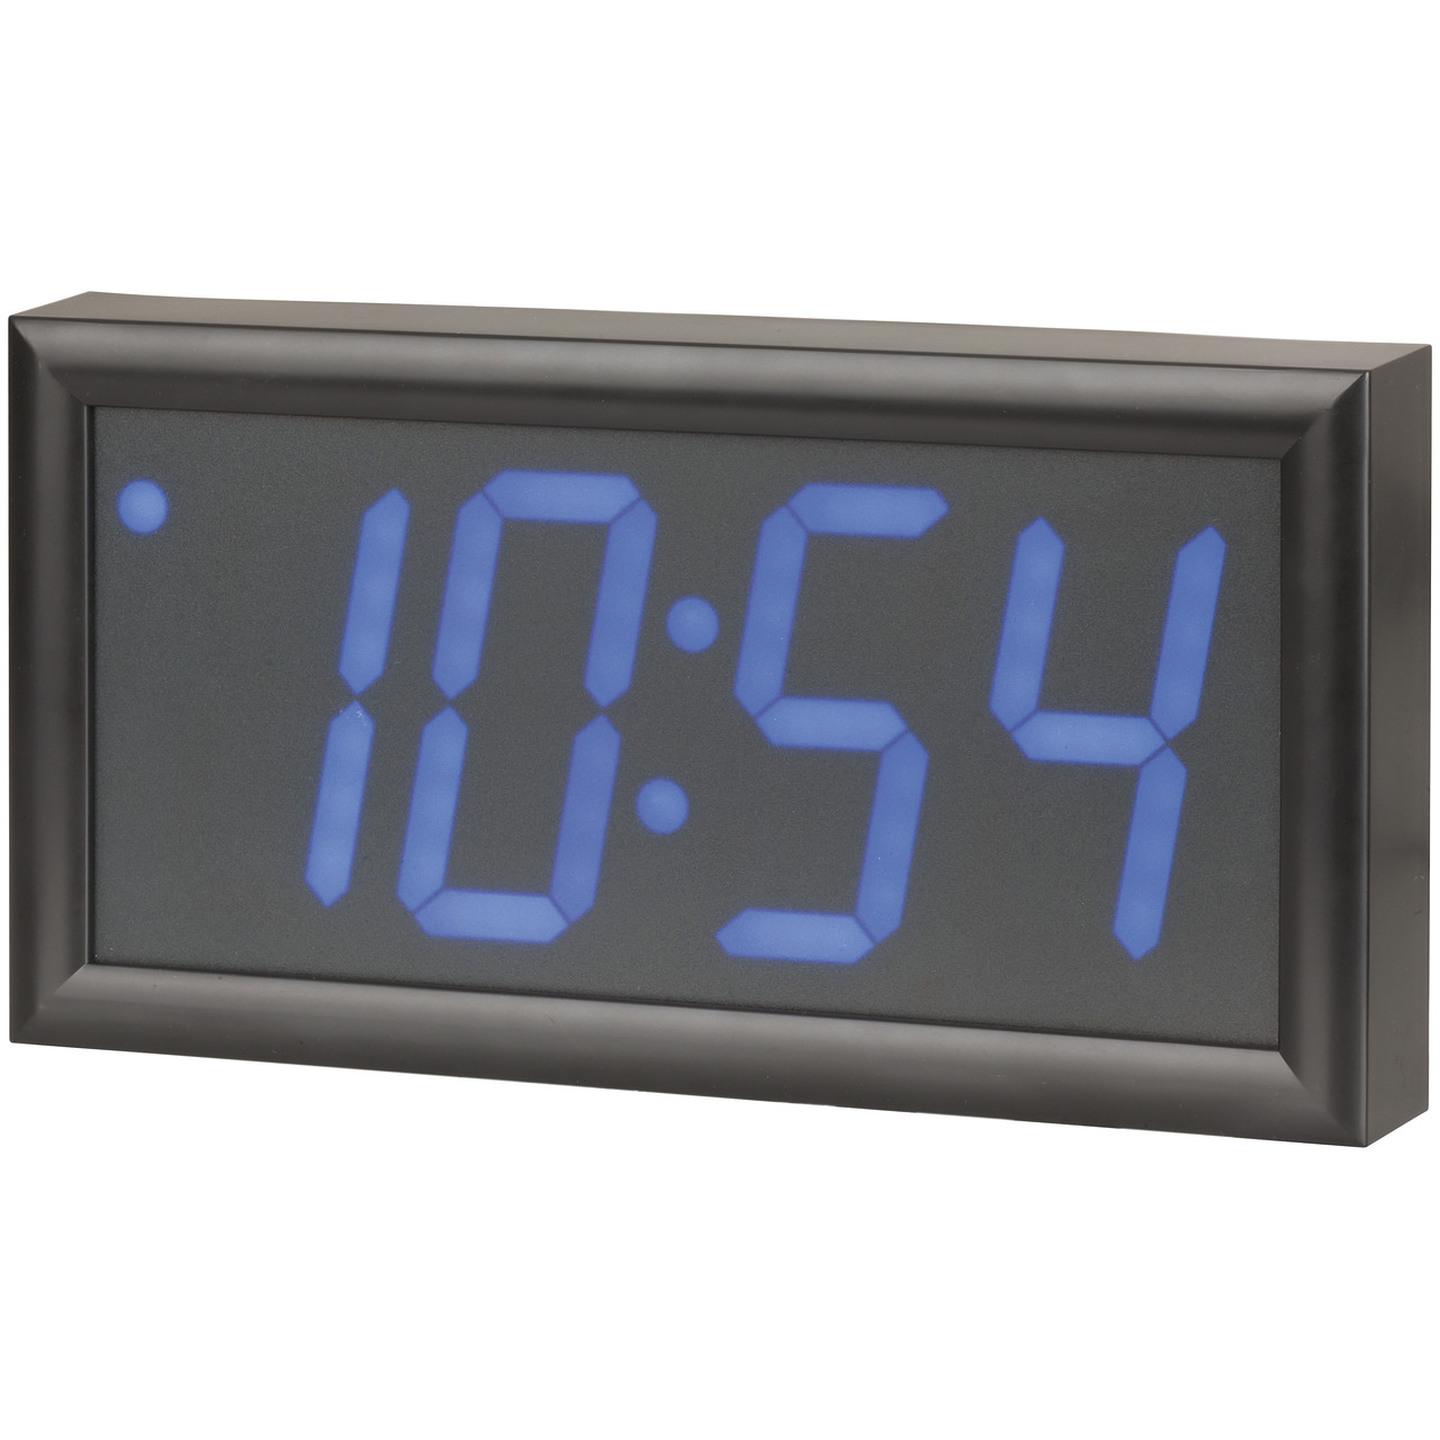 LED Wall Clock with Calendar and Temperature Display